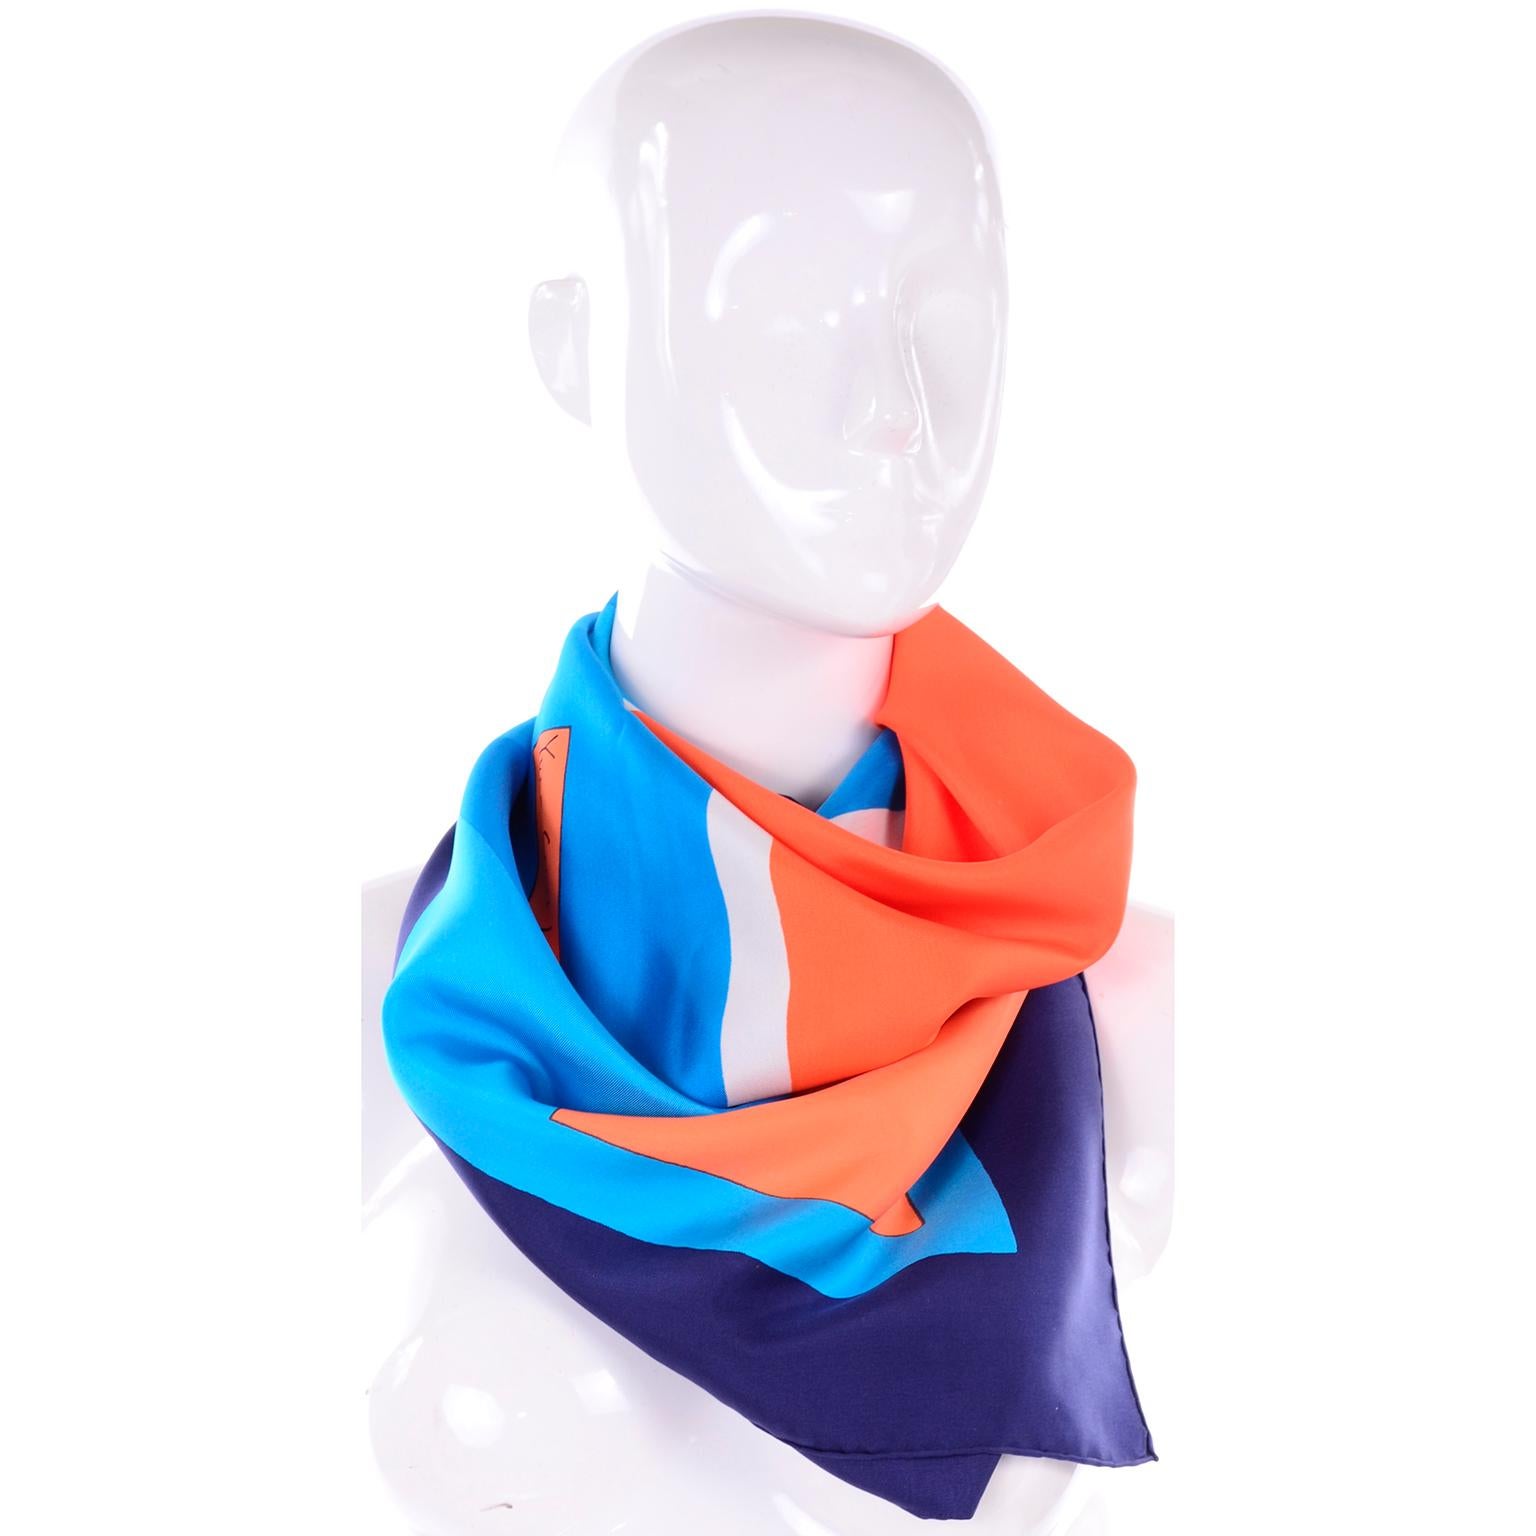 This is a colorful vintage silk scarf designed by Yves Saint Laurent in the late 1970's or early 1980's.  The geometric print is in shades of blue, orange and white. Yves Saint Laurent's signature is found in a rectangle on the bottom center and the